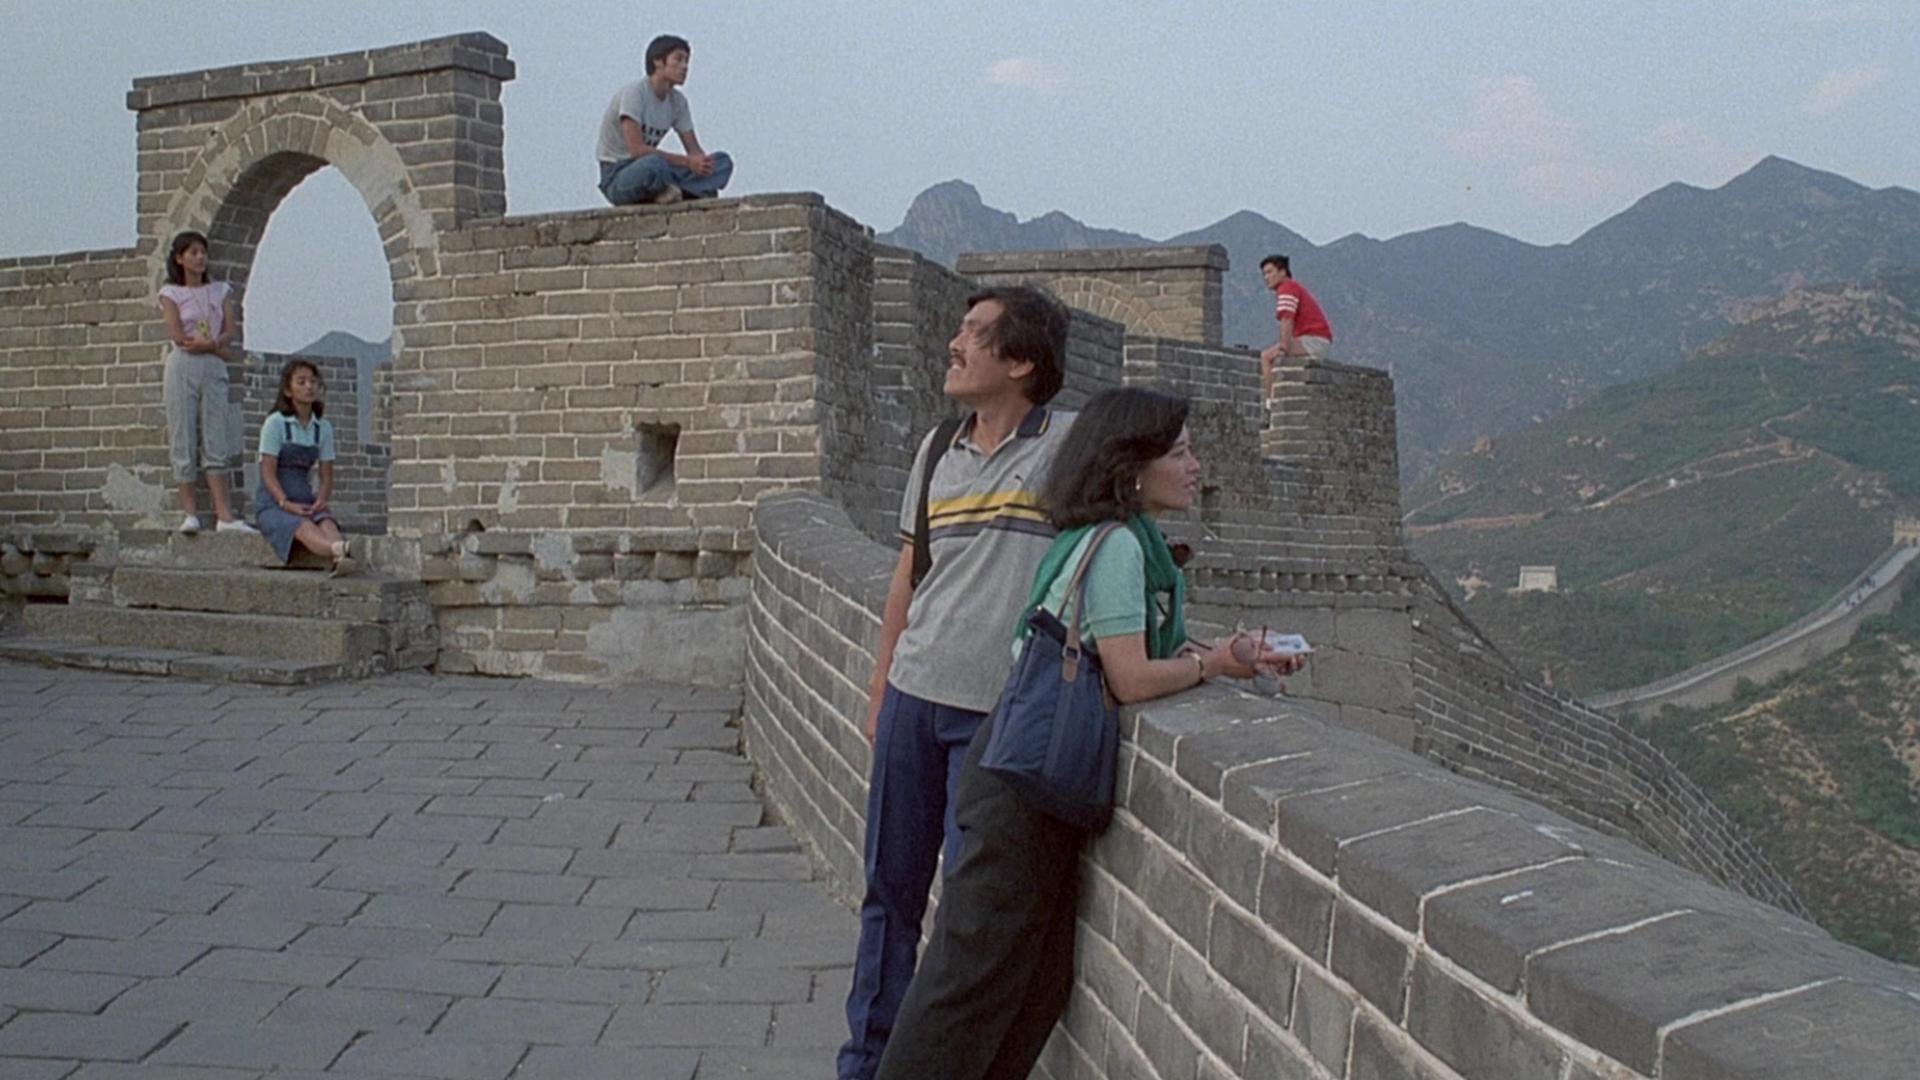 A Great Wall backdrop